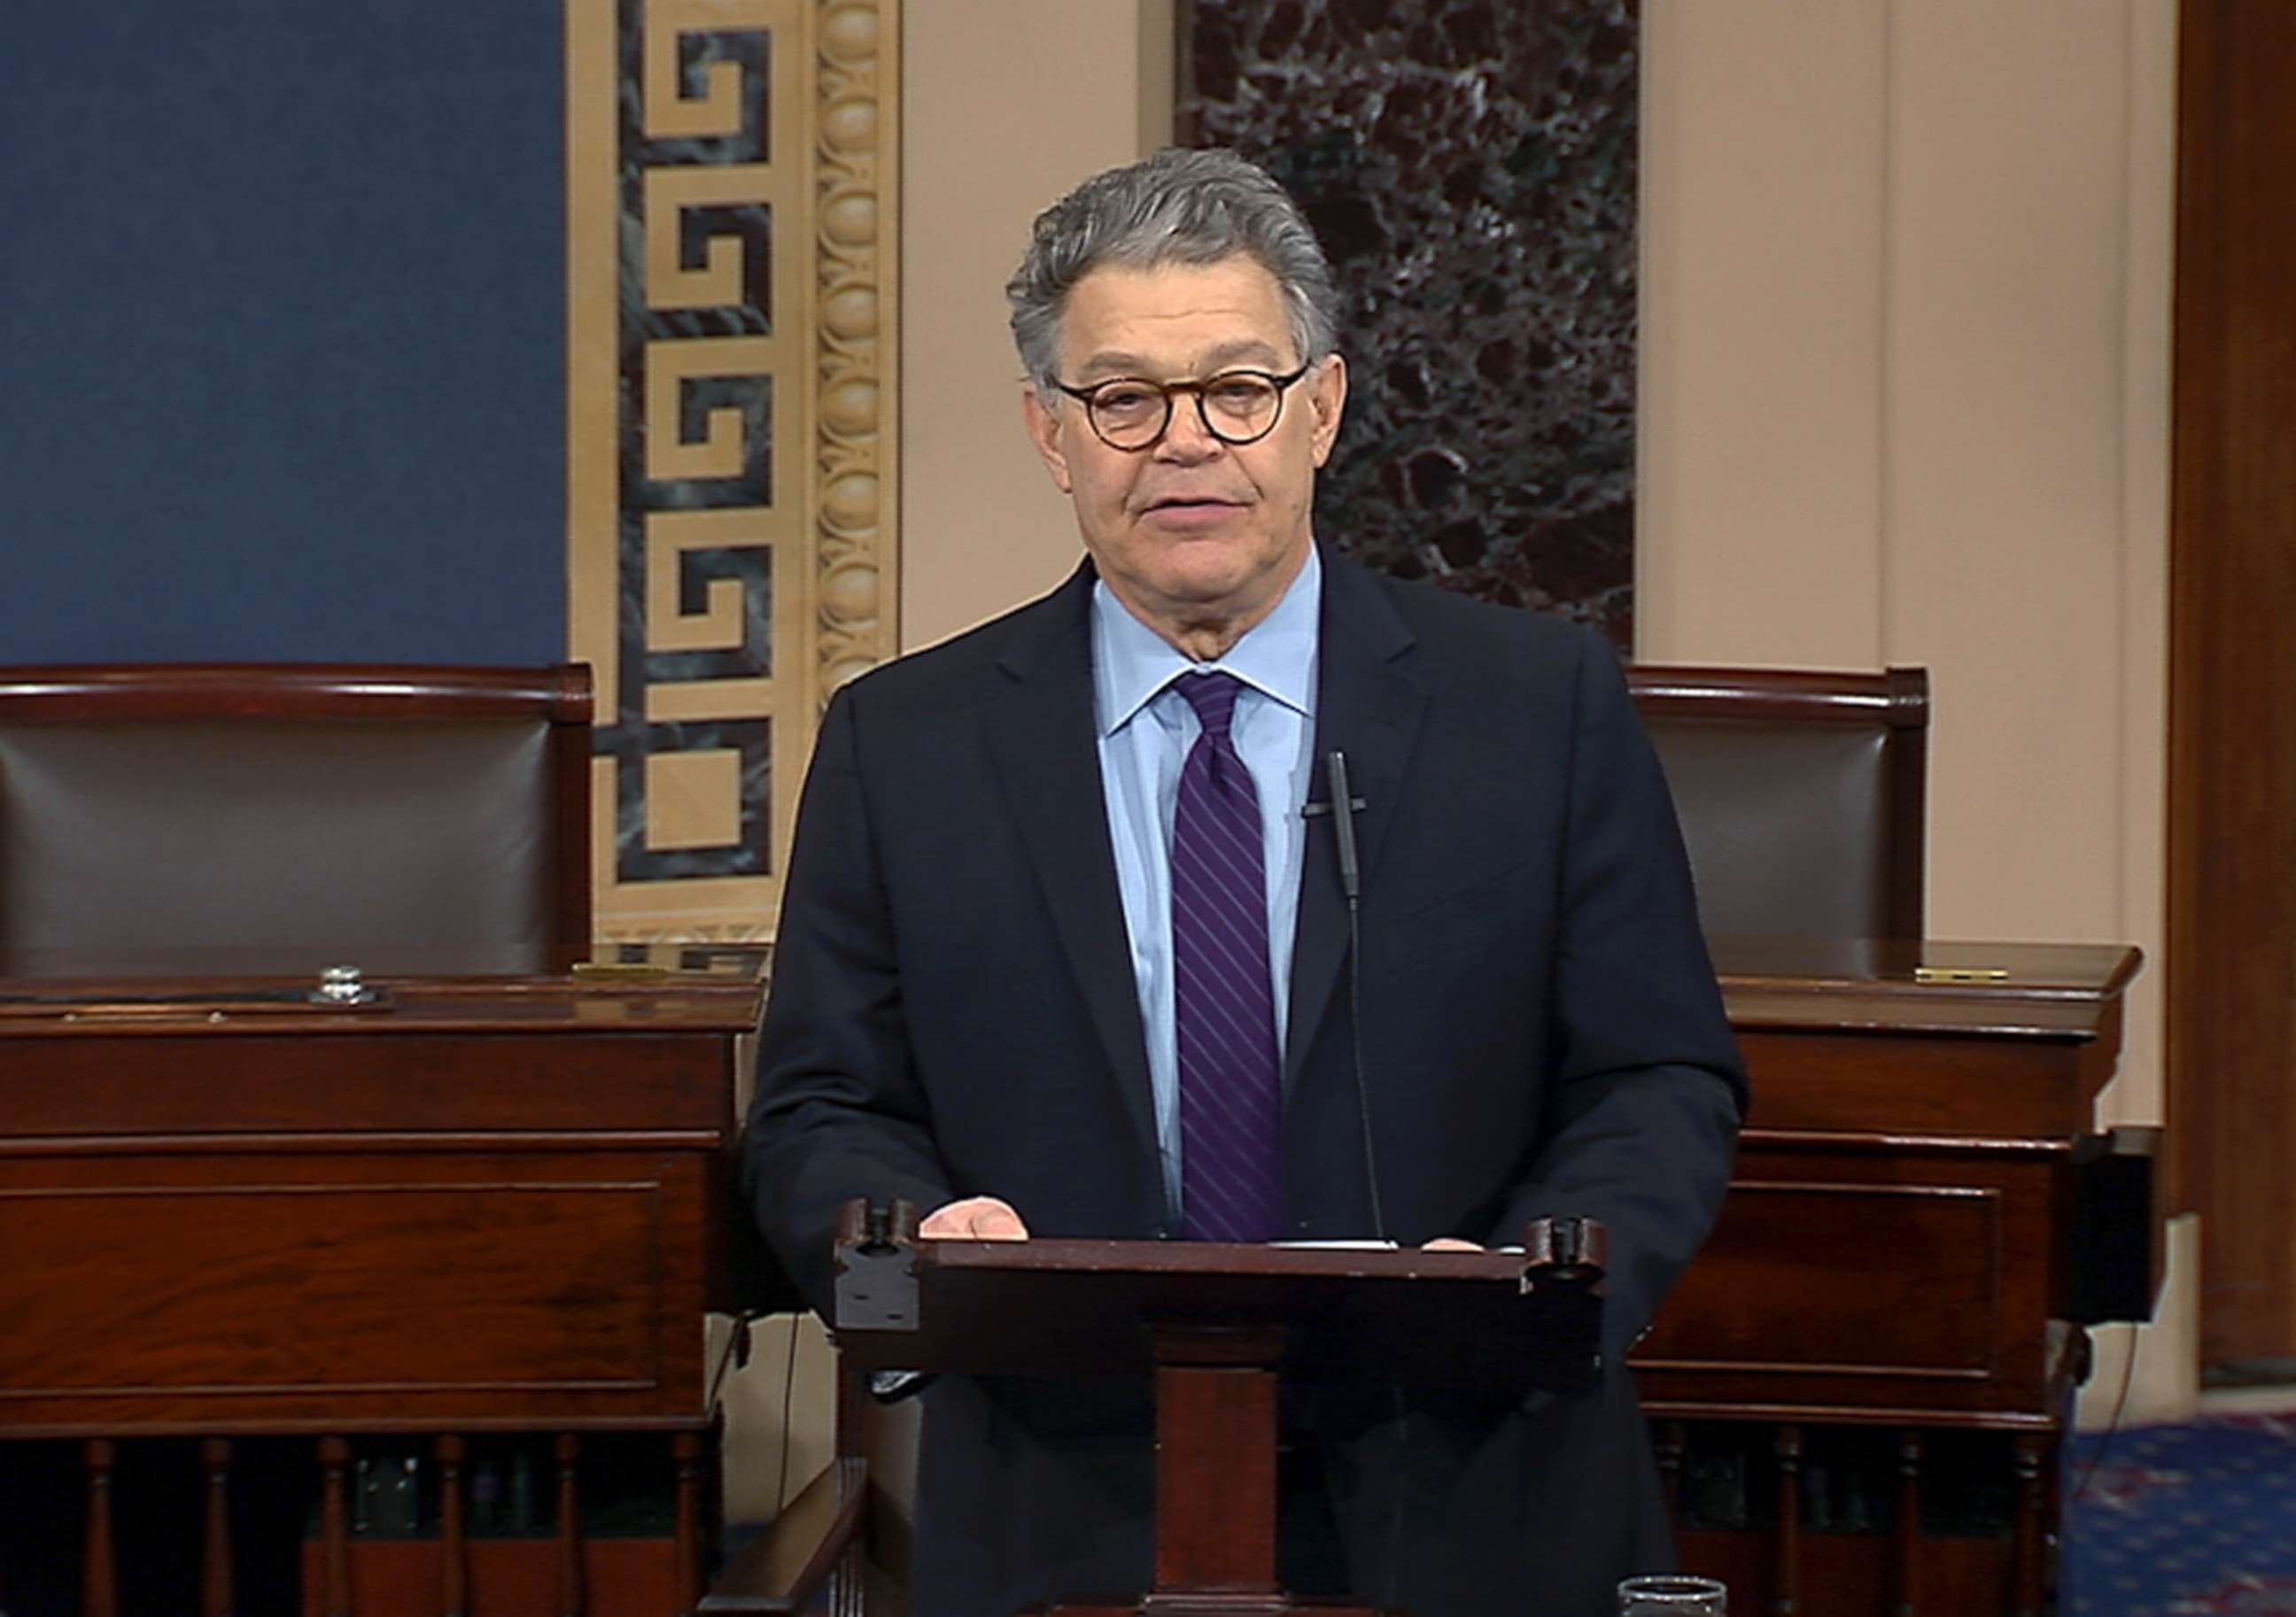 PHOTO: In this image from video from Senate Television, Sen. Al Franken, D-Minn., speaks on the Senate floor of the Capitol in Washington, Dec. 7, 2017.  